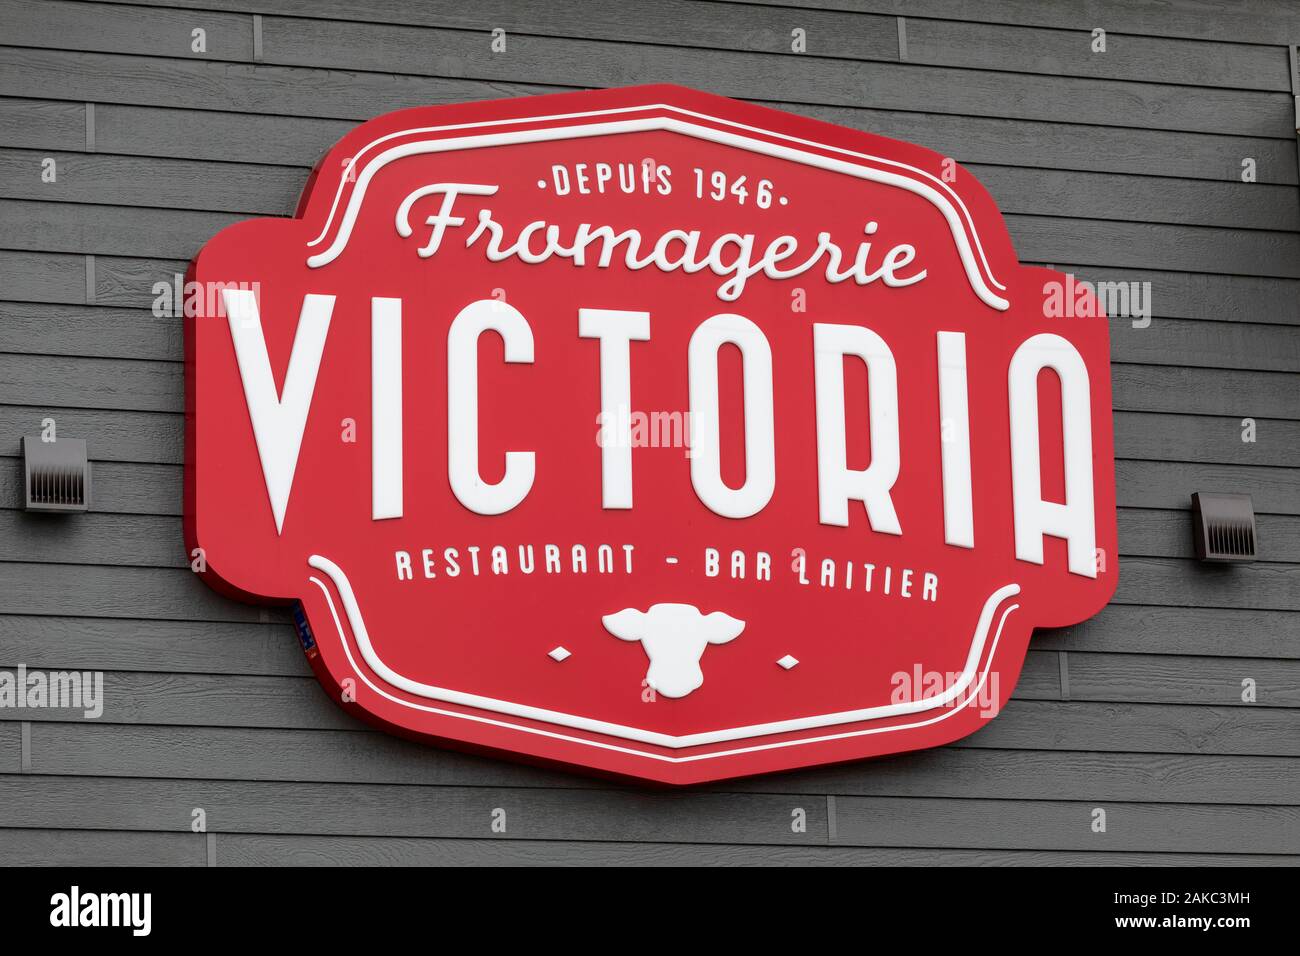 Canada, Province of Quebec, Centre-du-Québec region, in the footsteps of the invention of poutine, Victoriaville, the Victoria cheese dairy and its restauran Stock Photo